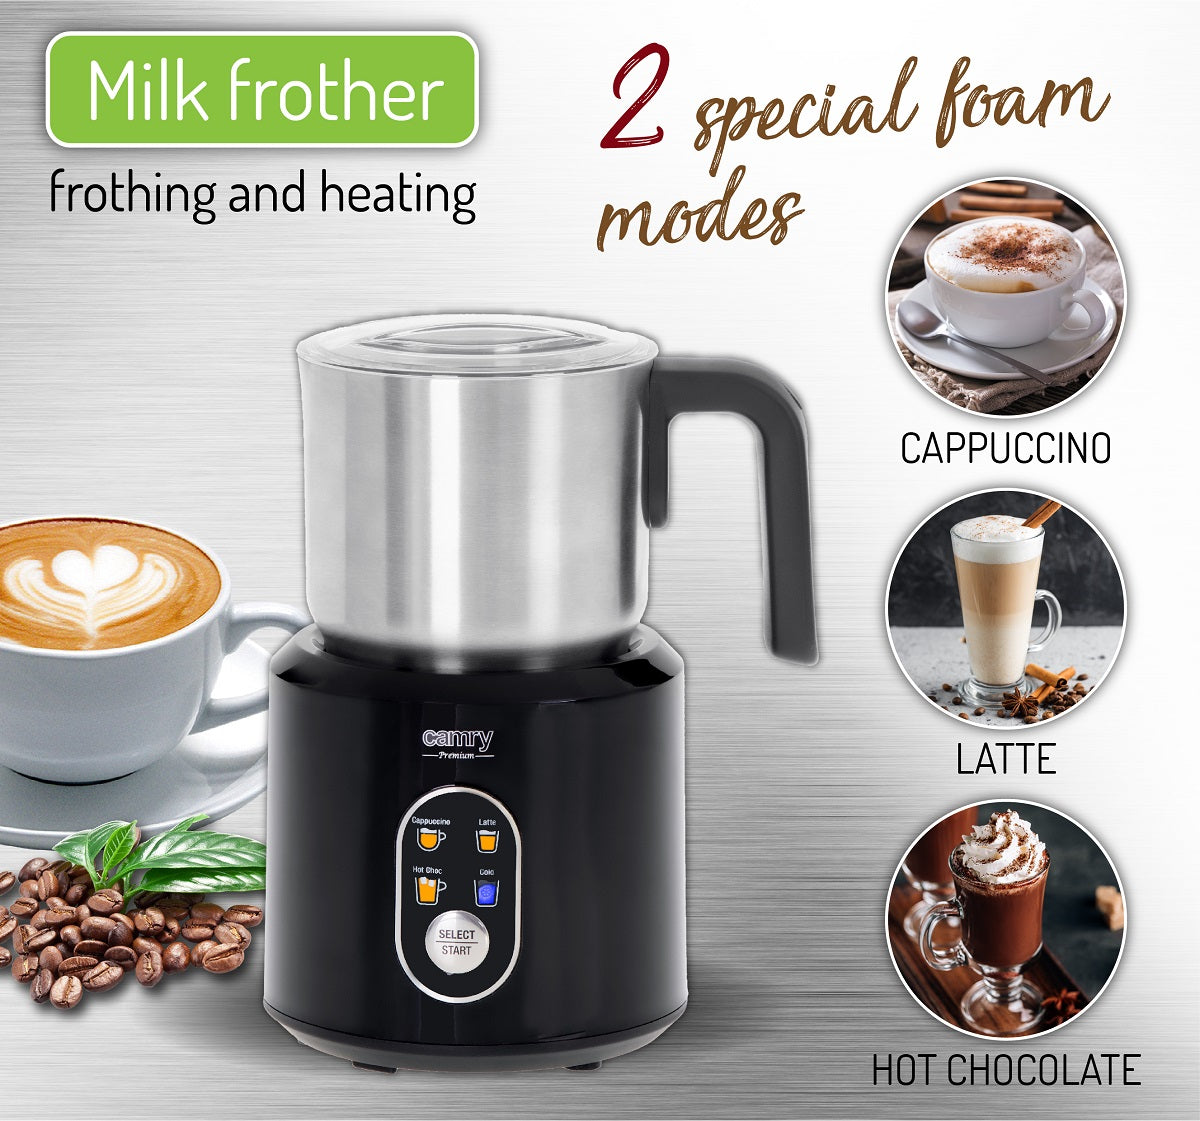 Camry CR4498 Milk Frother 2in1 Frothing and Heating